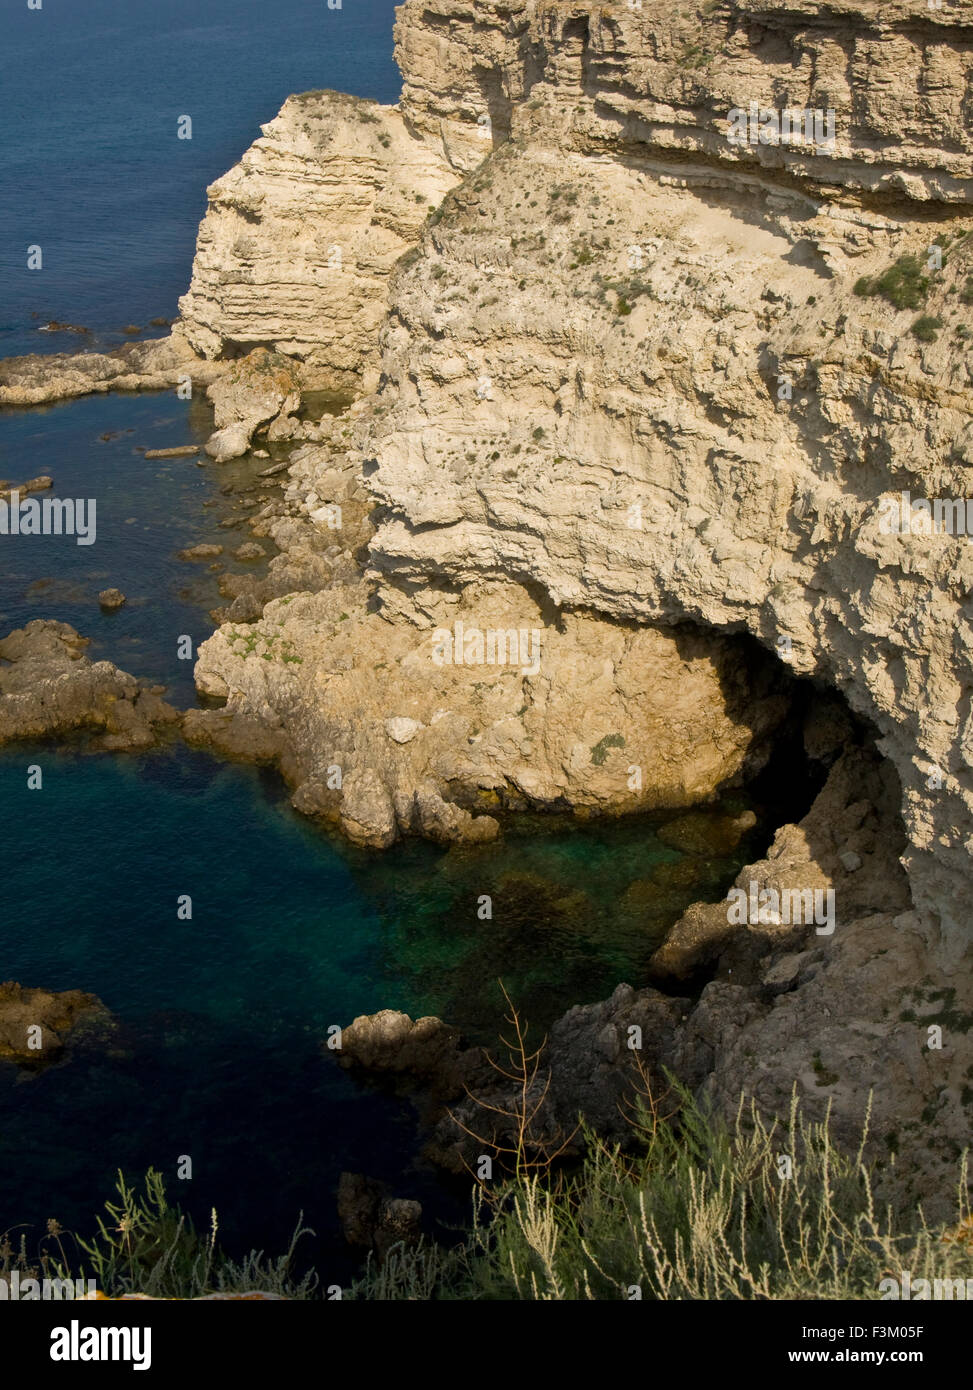 Sea landscape - rock on shore with cave in water, recorded in place Tarhankut in Crimea. Stock Photo